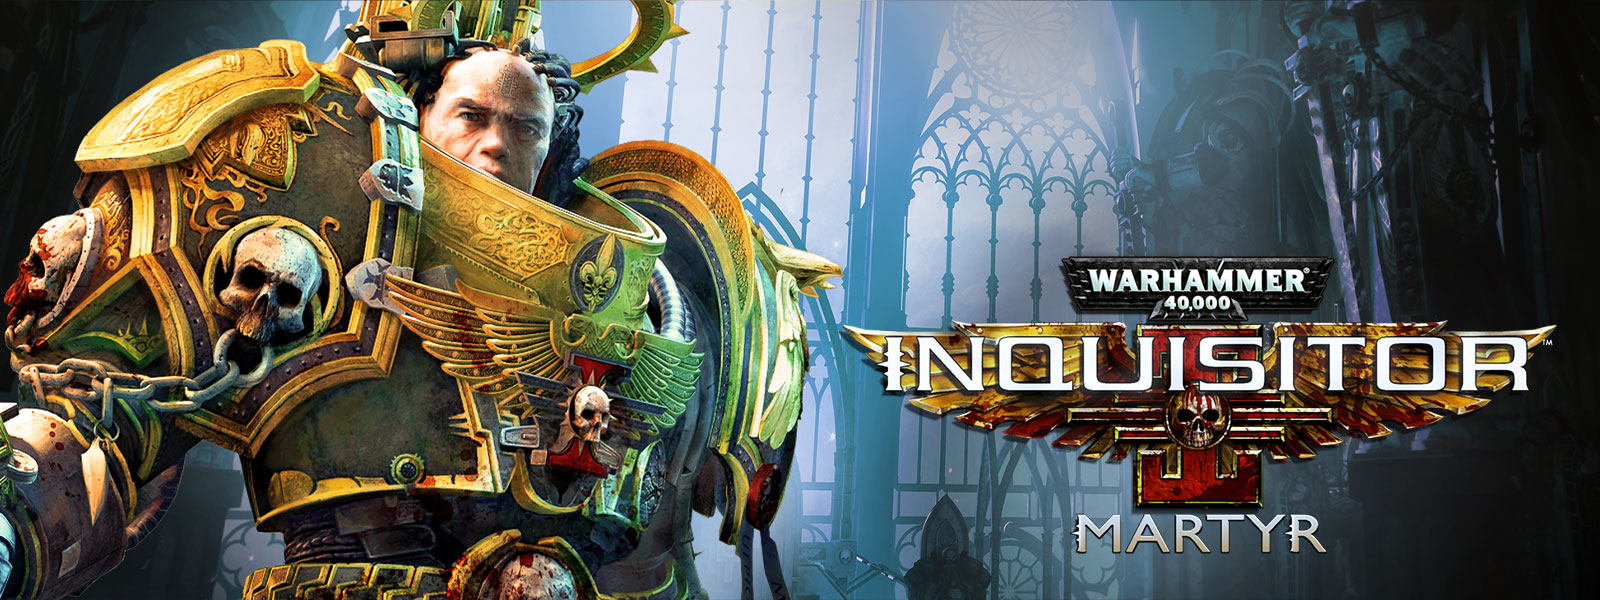 Warhammer 40,000: Inquisitor, Martyr, An Inquisitor stands in an extravagant cathedral.